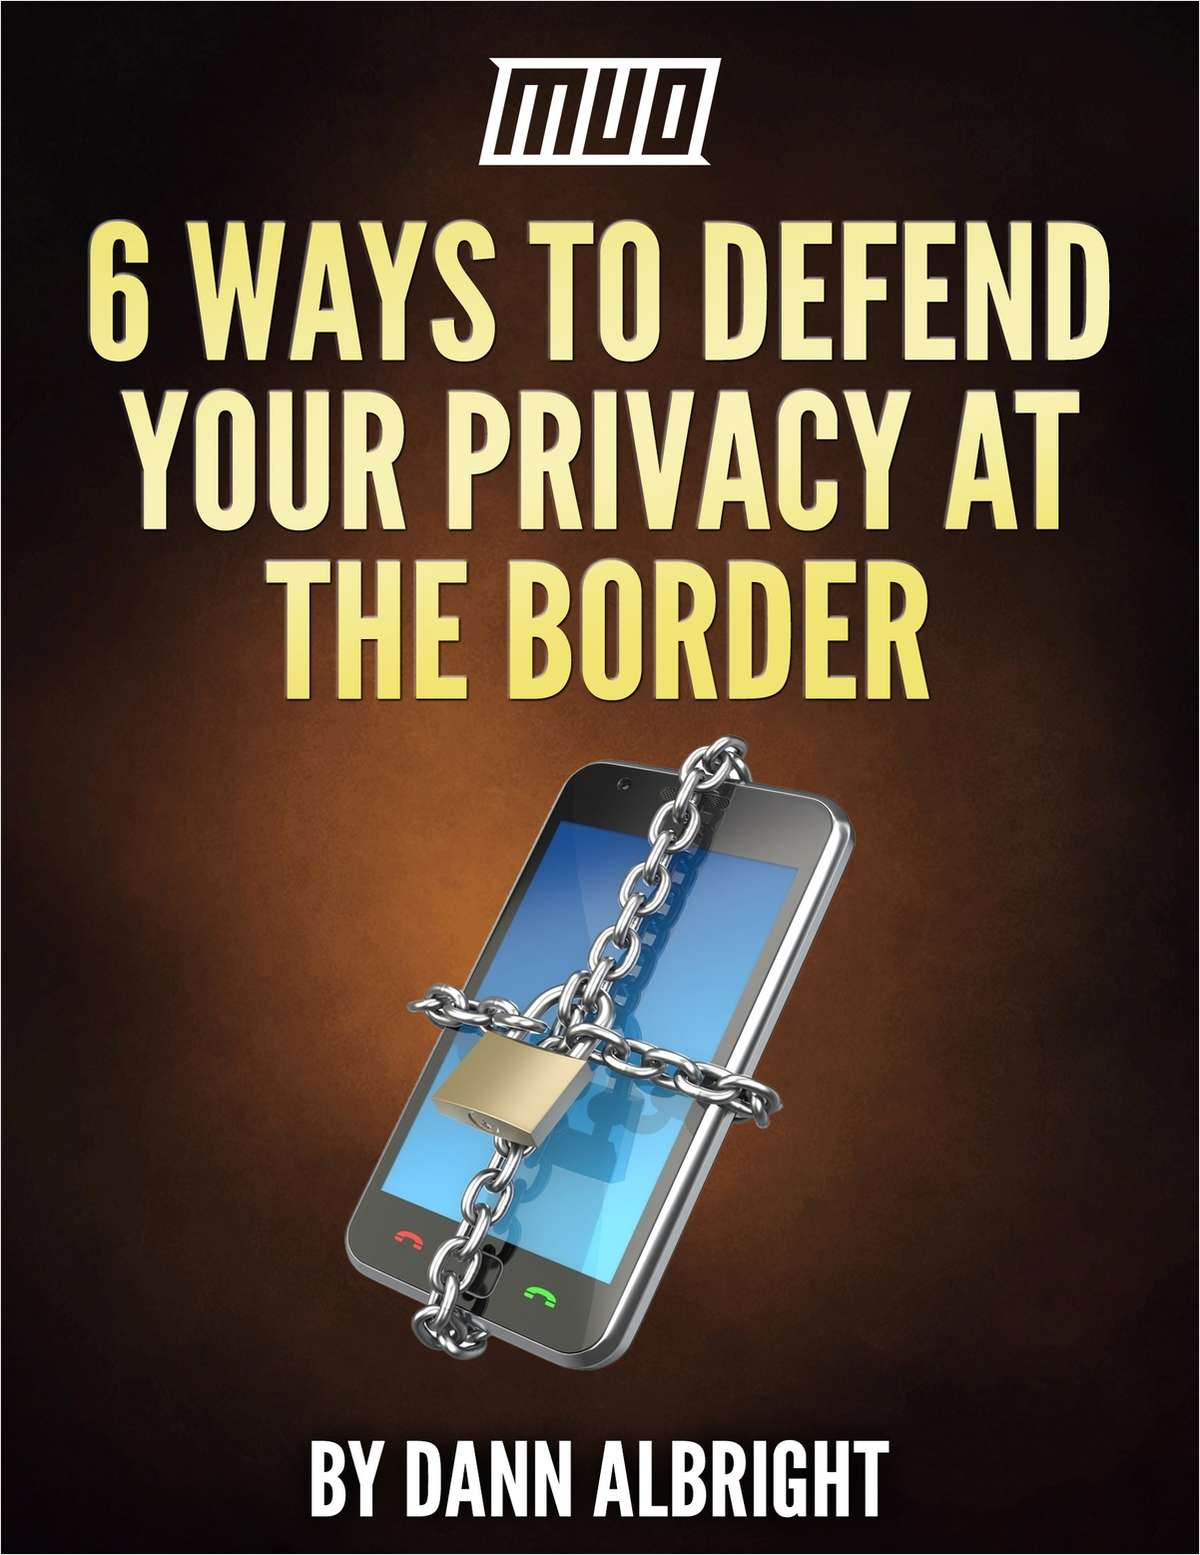 6 Ways to Defend Your Privacy at the Border